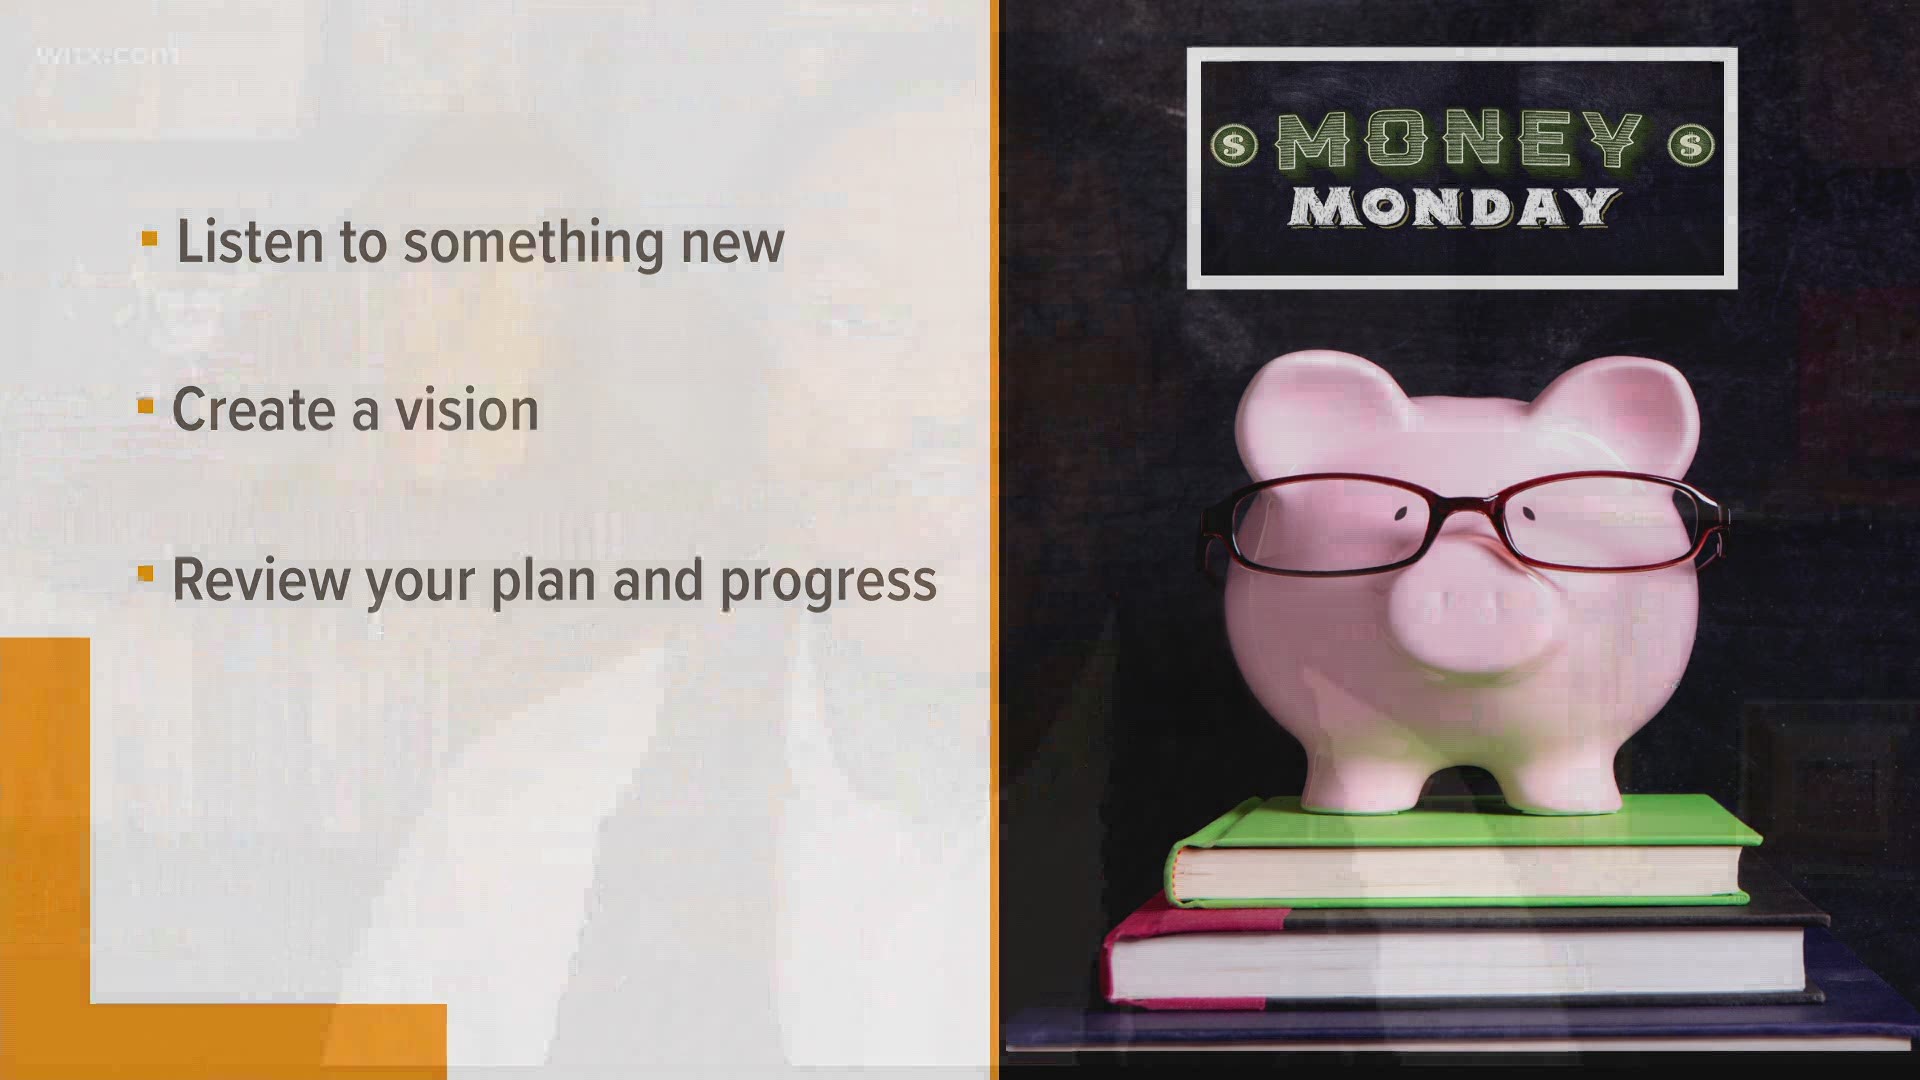 Know Money Inc.'s Steven Hughes is on your side with ways to stick with your 2021 money resolutions.